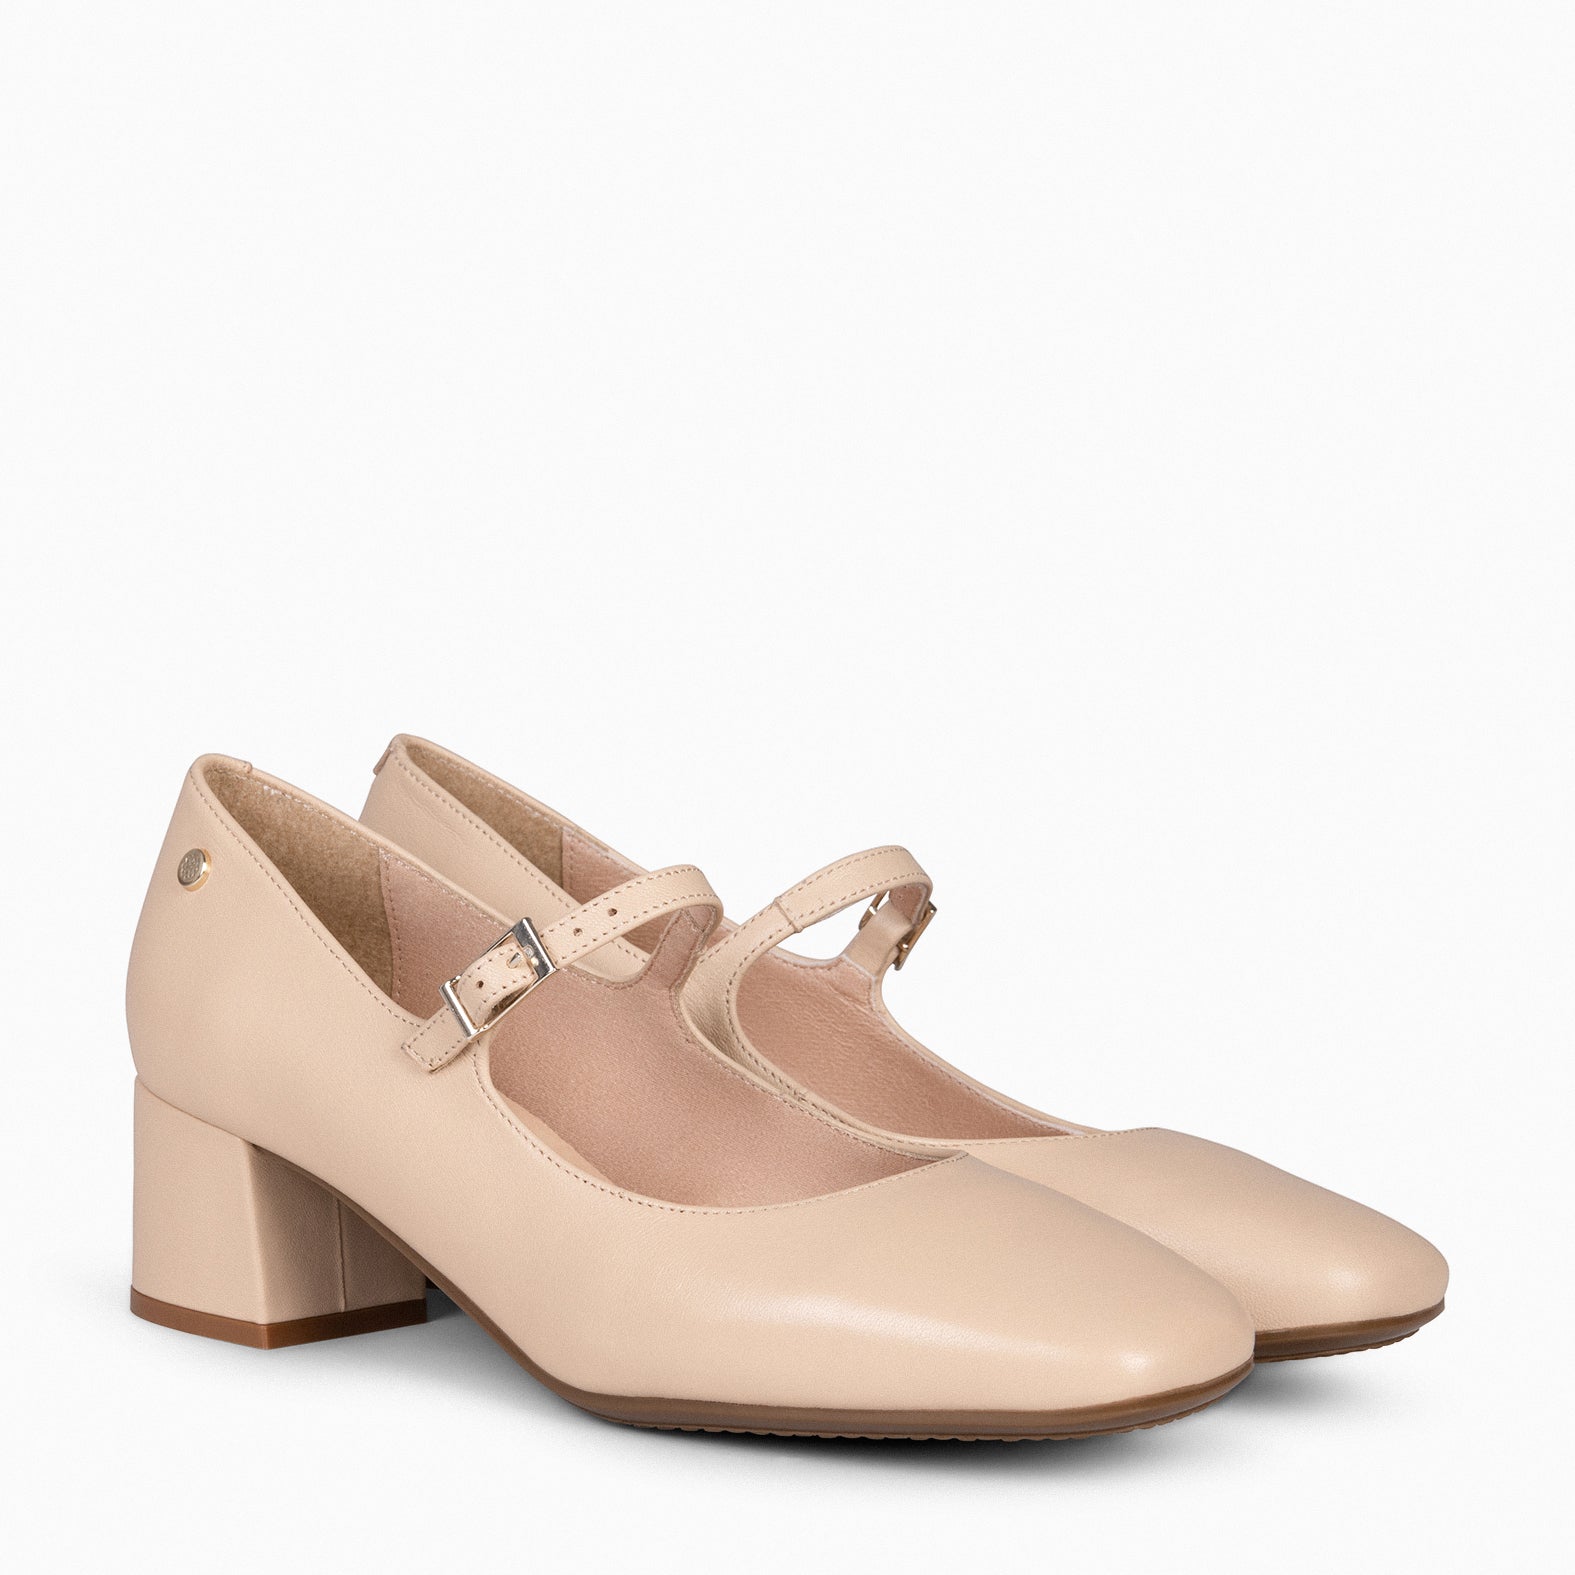 BELLA – BIEGE suede leather mary-jane shoes